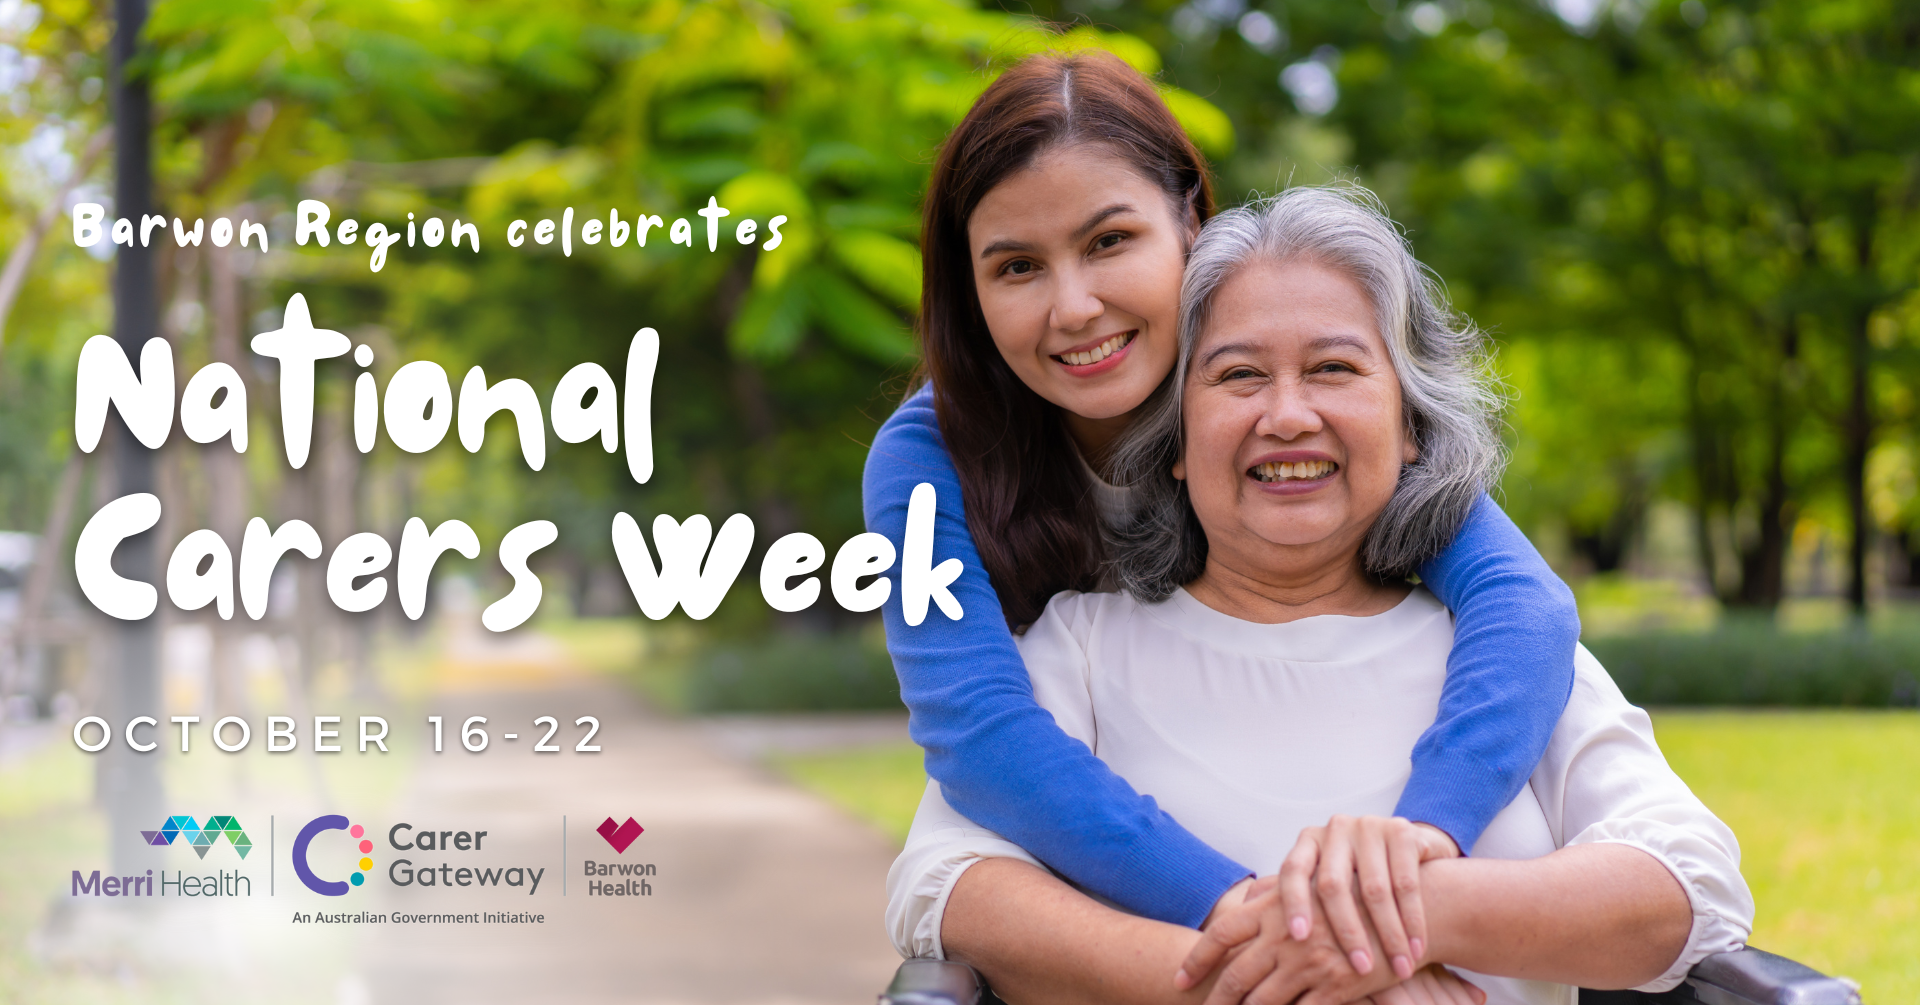 FB carers week event banner 1920 1005 px